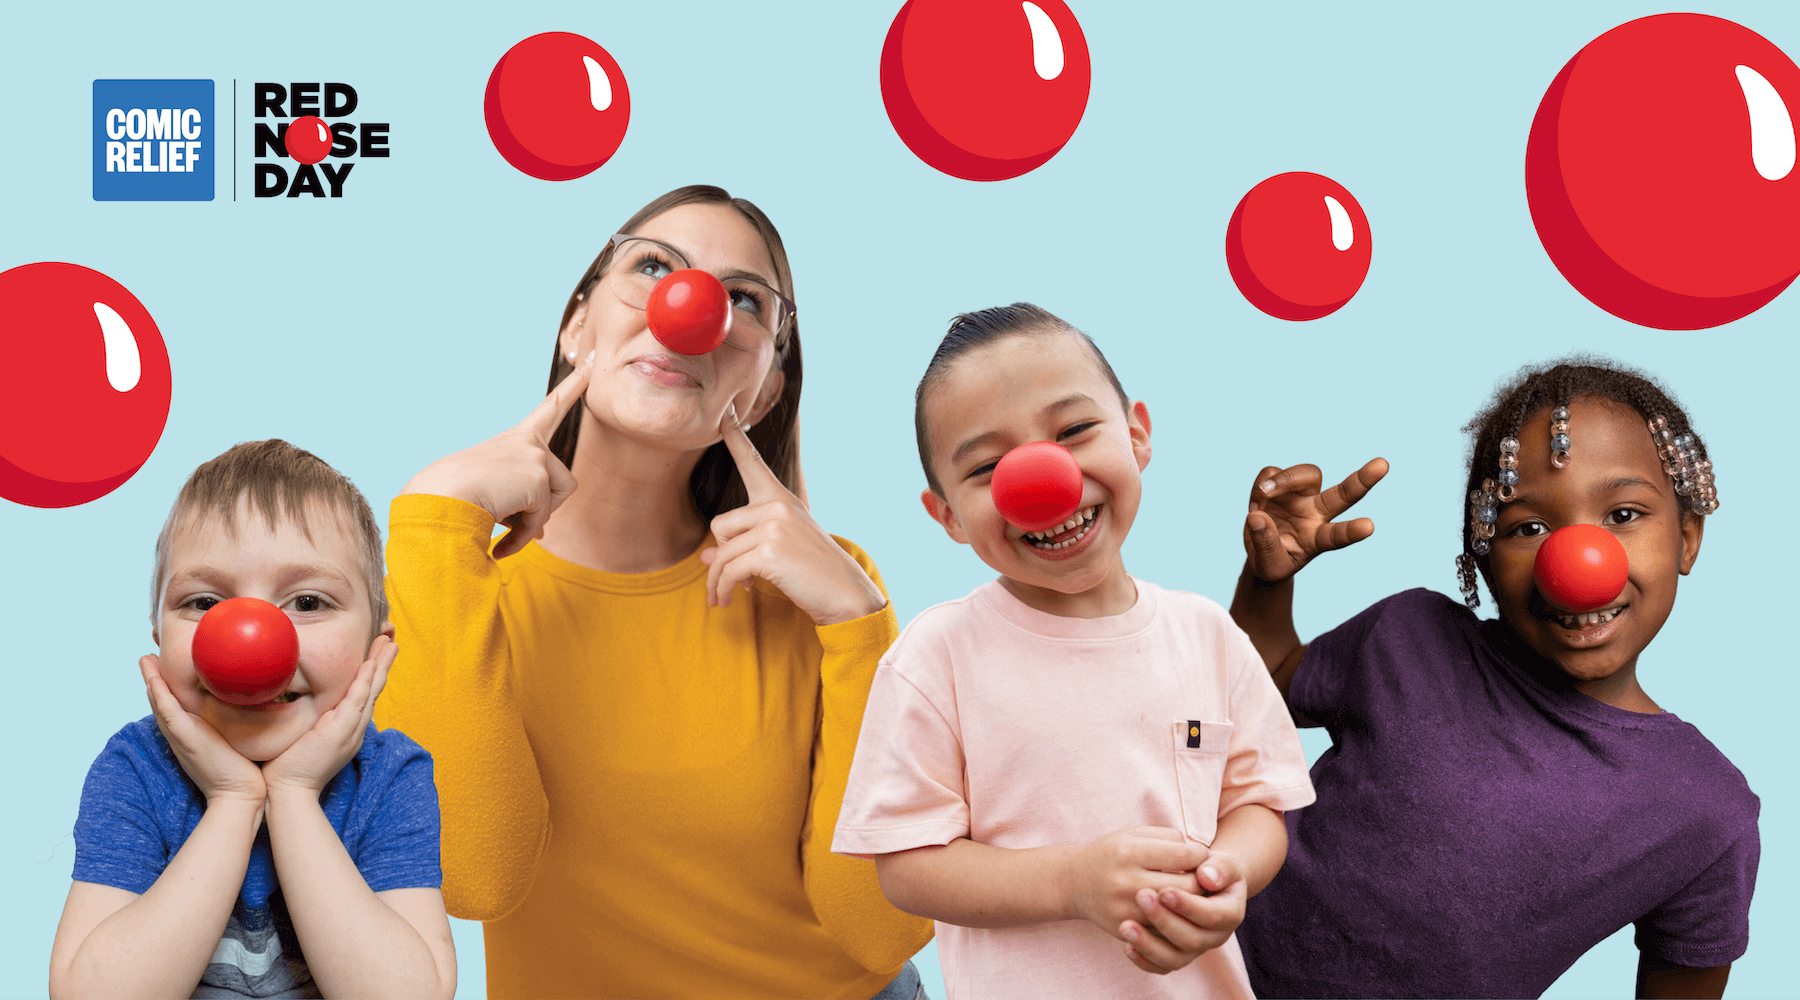 Red Nose Day Returns May 25 for Its Ninth Year To Raise Money, Change Lives and Build Healthy